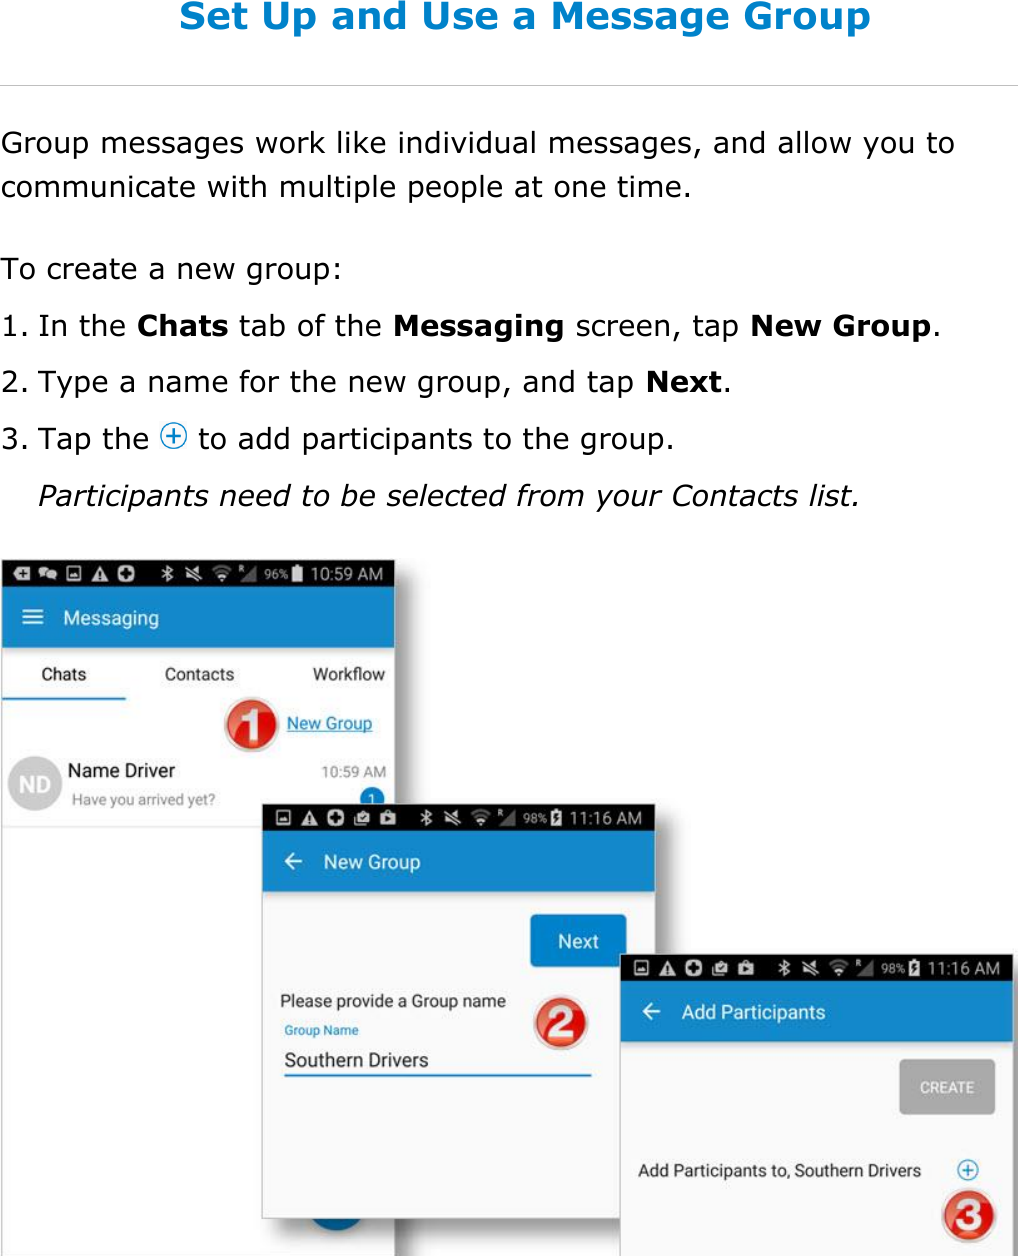 Send Messages, Forms, and Workflows DriverConnect User Guide  71 © 2016-2017, Rand McNally, Inc. Set Up and Use a Message Group Group messages work like individual messages, and allow you to communicate with multiple people at one time. To create a new group: 1. In the Chats tab of the Messaging screen, tap New Group. 2. Type a name for the new group, and tap Next. 3. Tap the   to add participants to the group. Participants need to be selected from your Contacts list.    